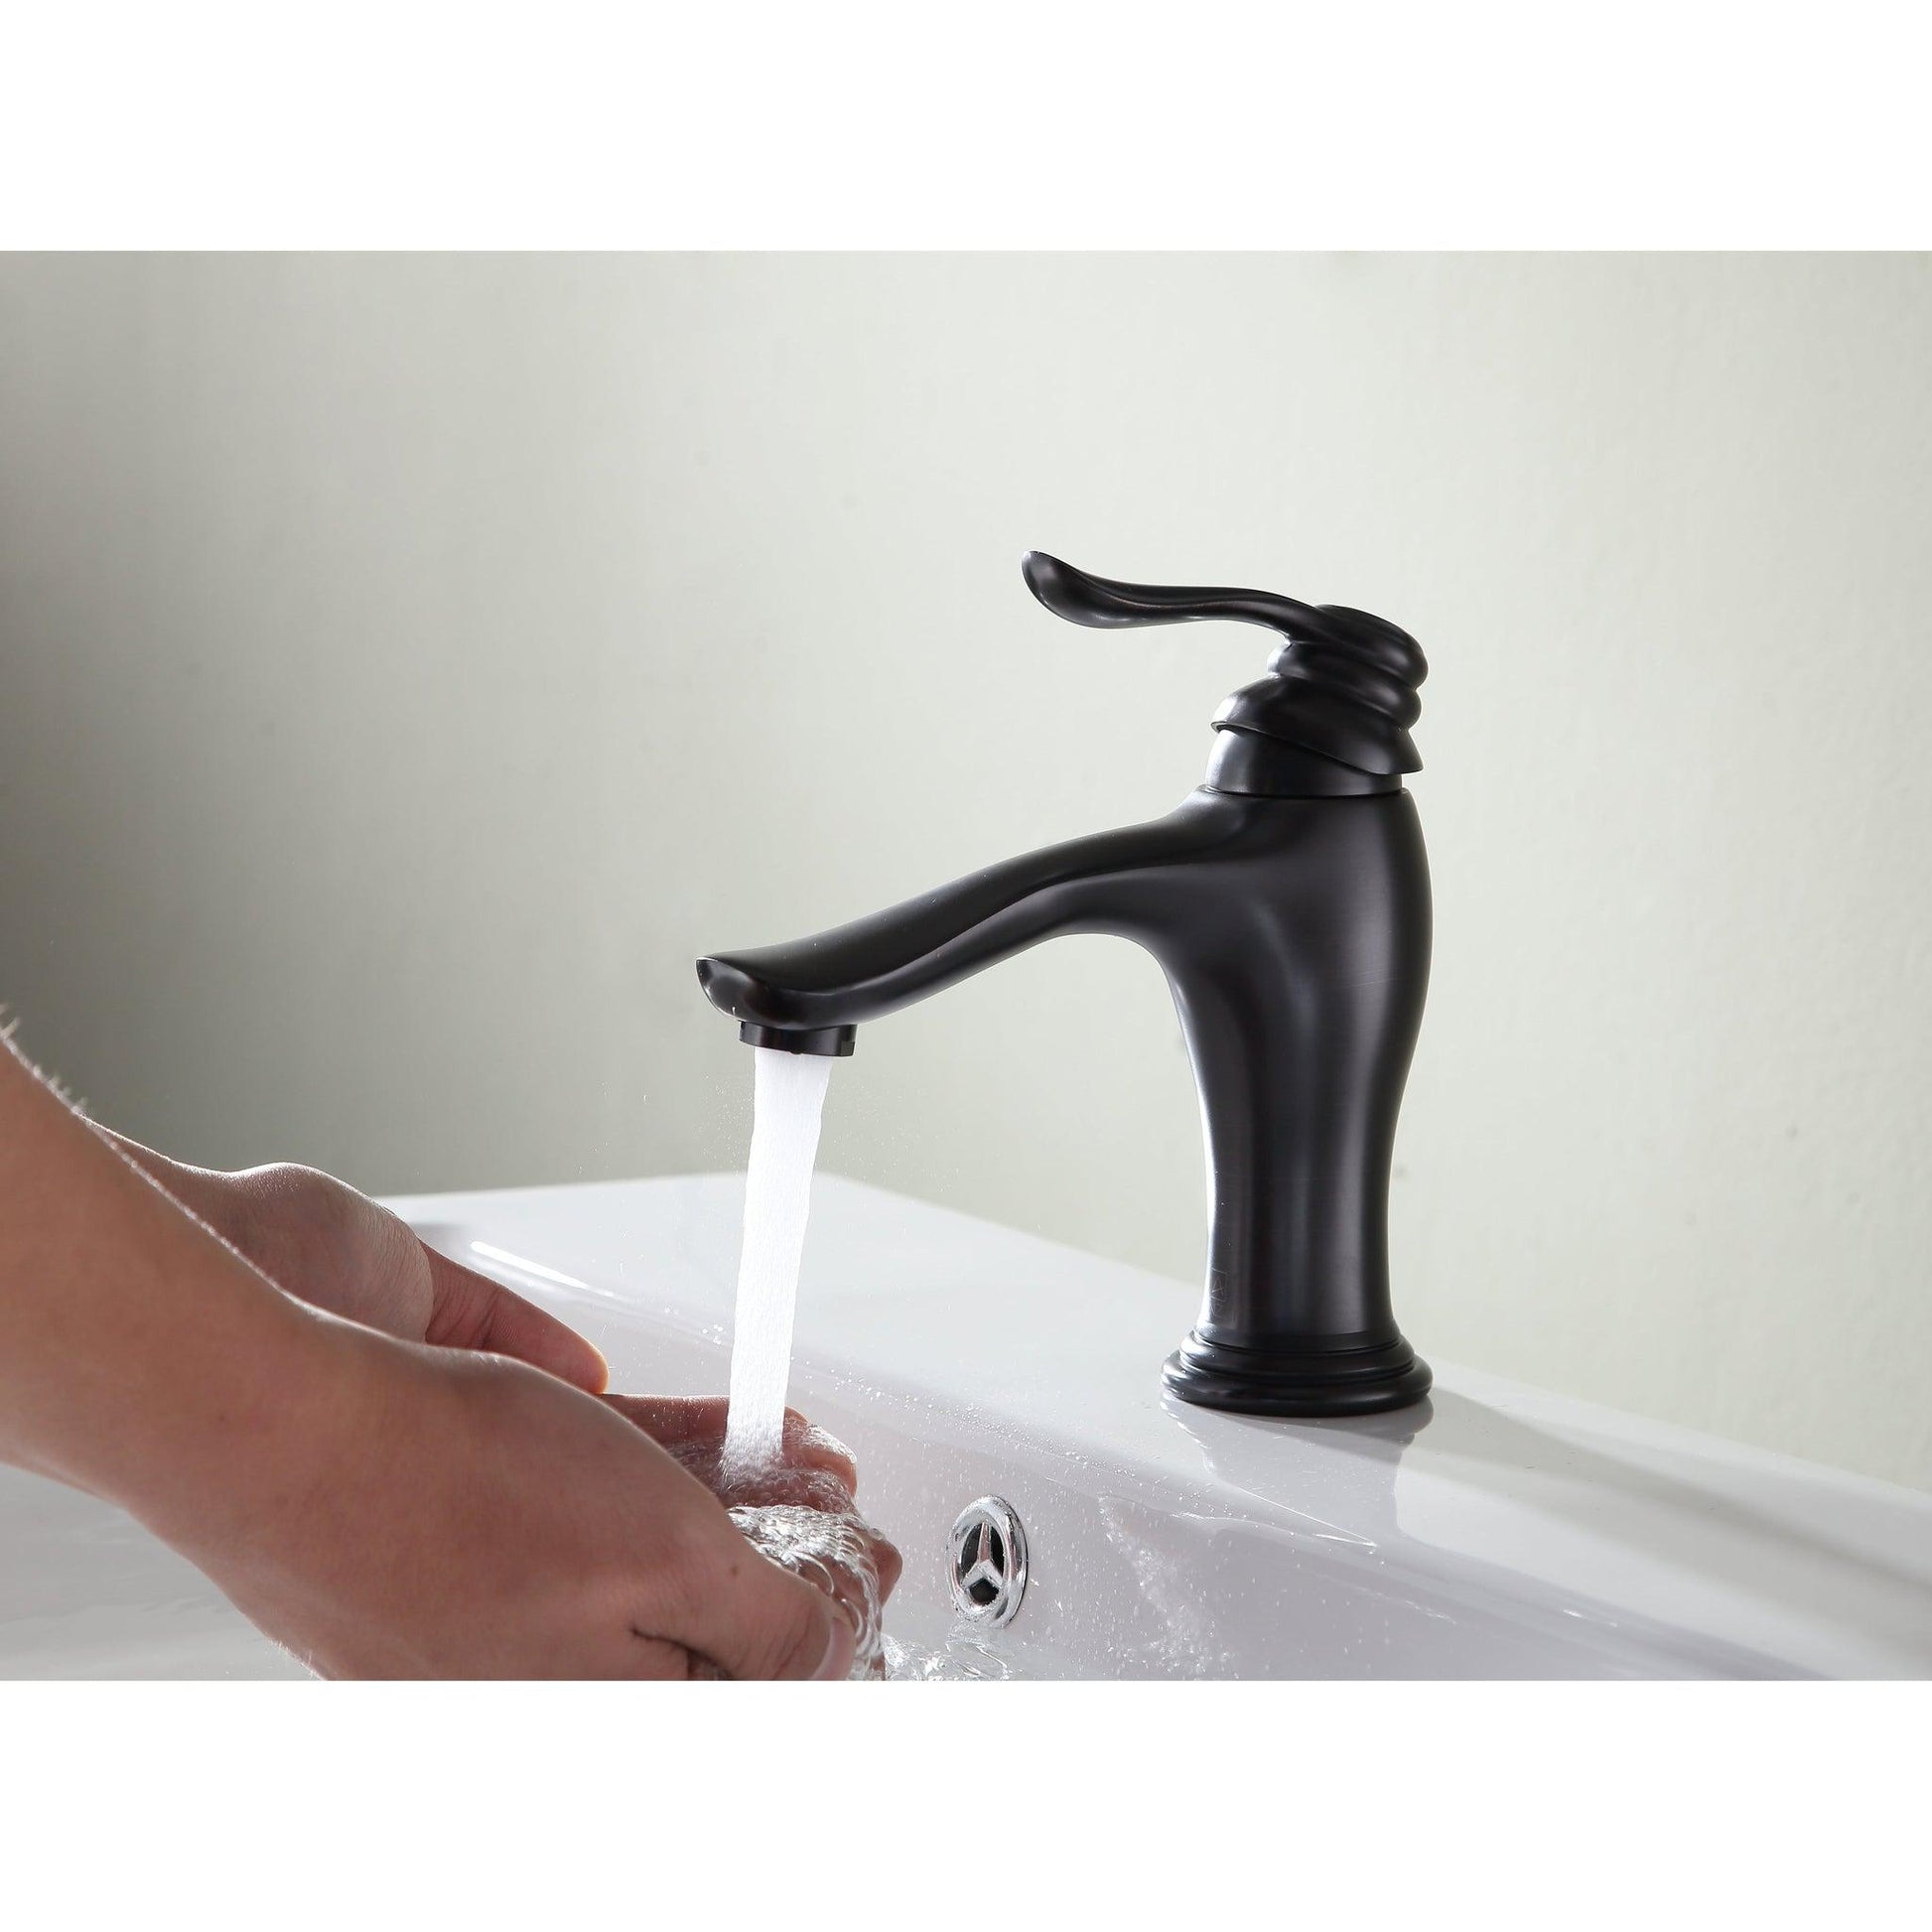 ANZZI Anfore Series 3" Single Hole Oil Rubbed Bronze Bathroom Sink Faucet